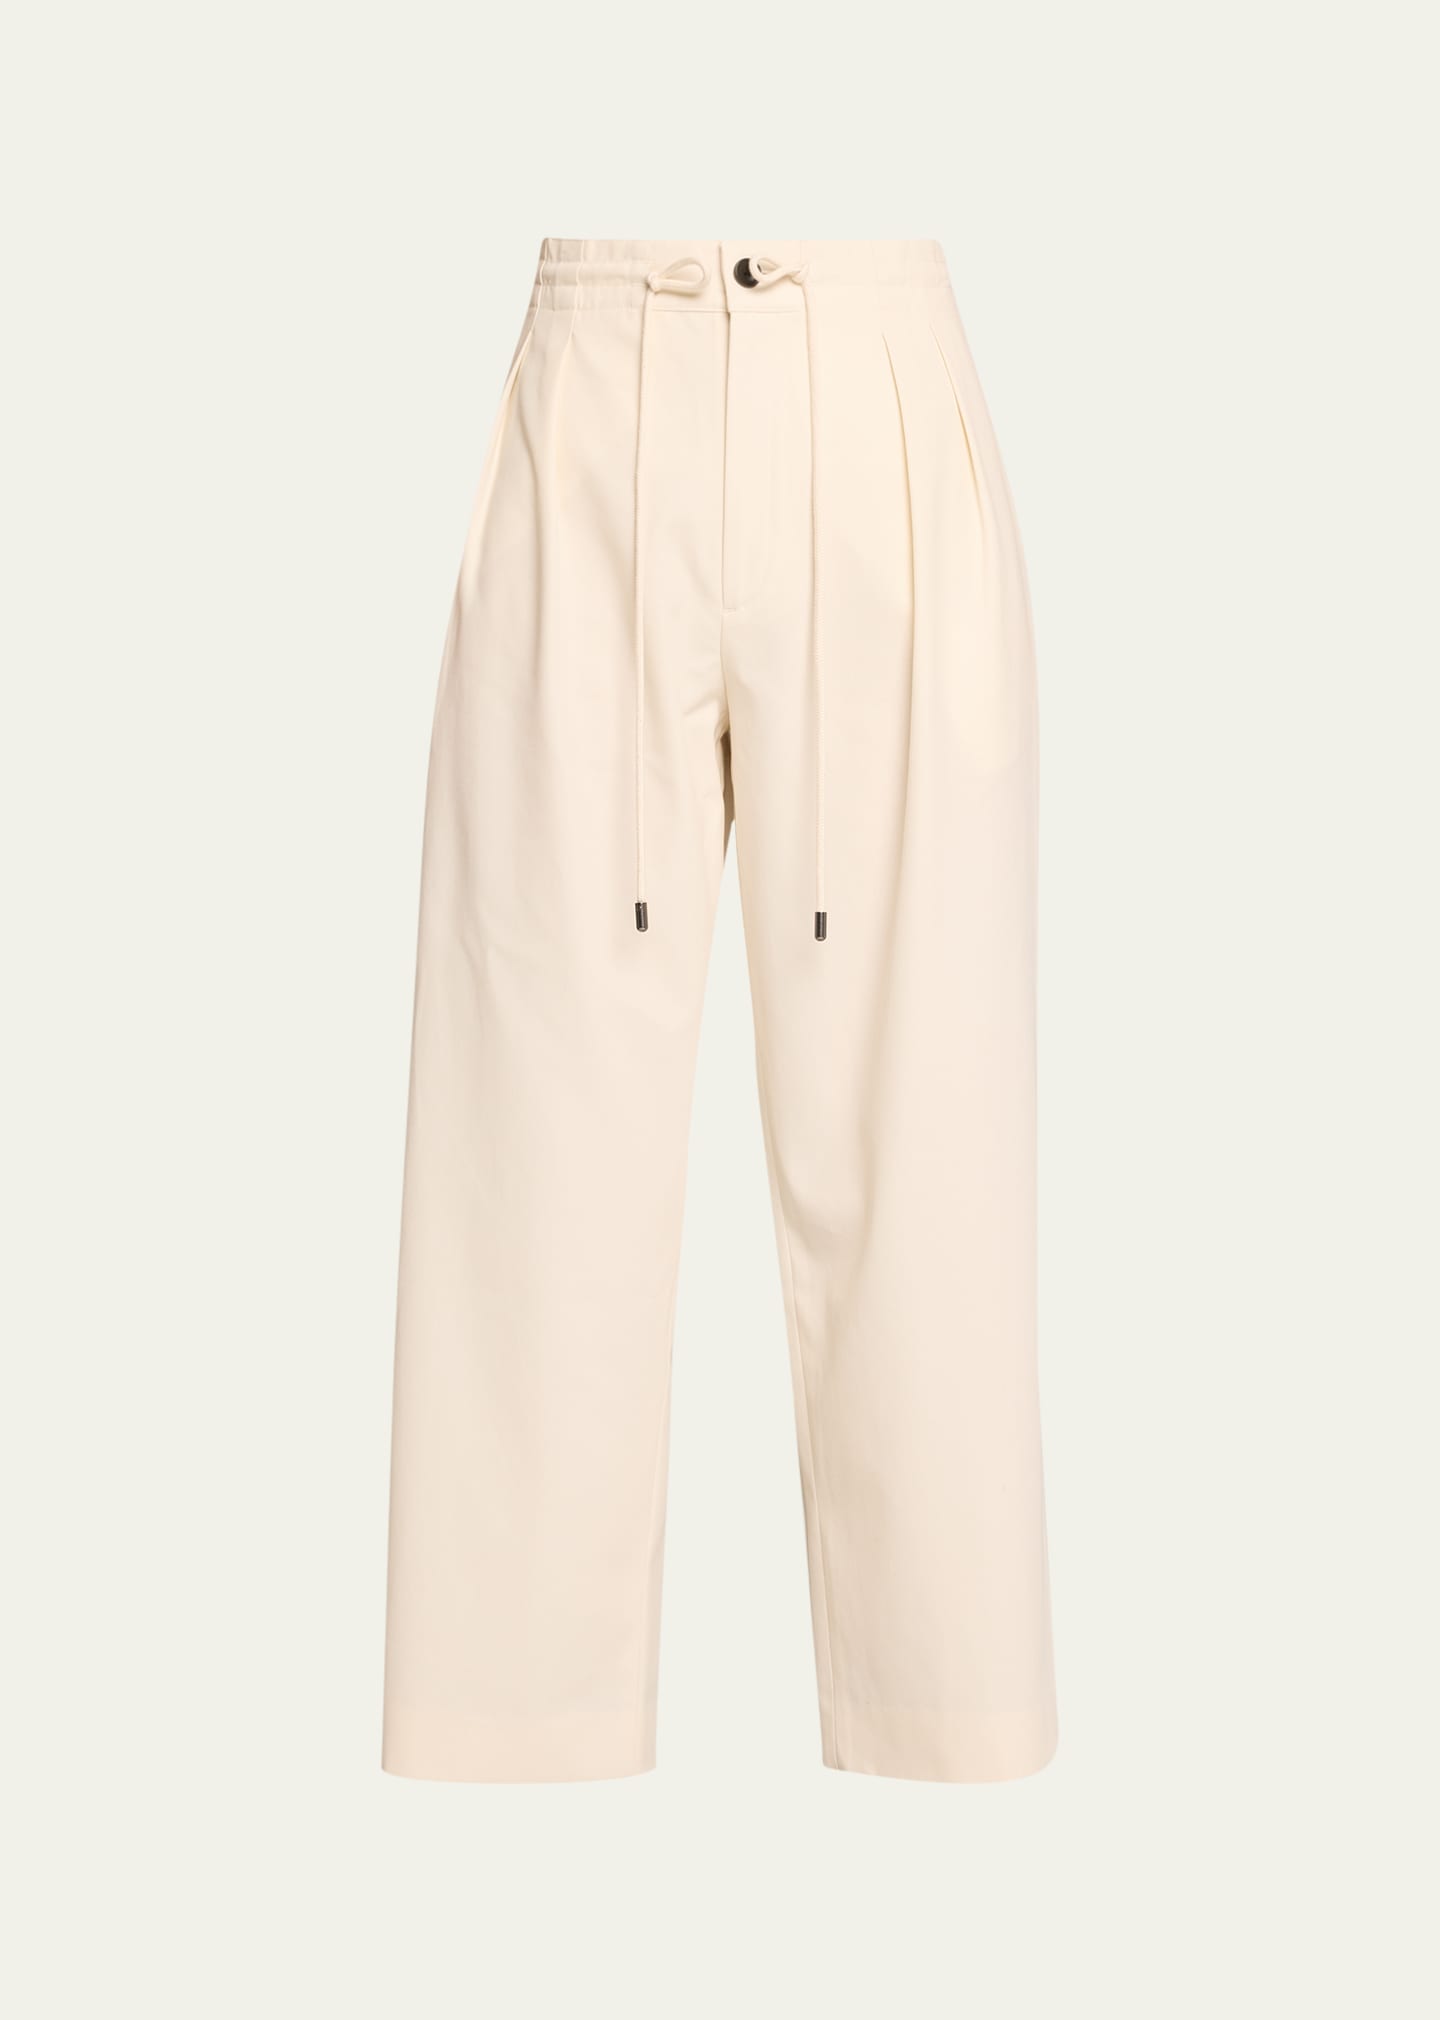 Maria Mcmanus Pleat Front Drawstring Trousers In Ivory